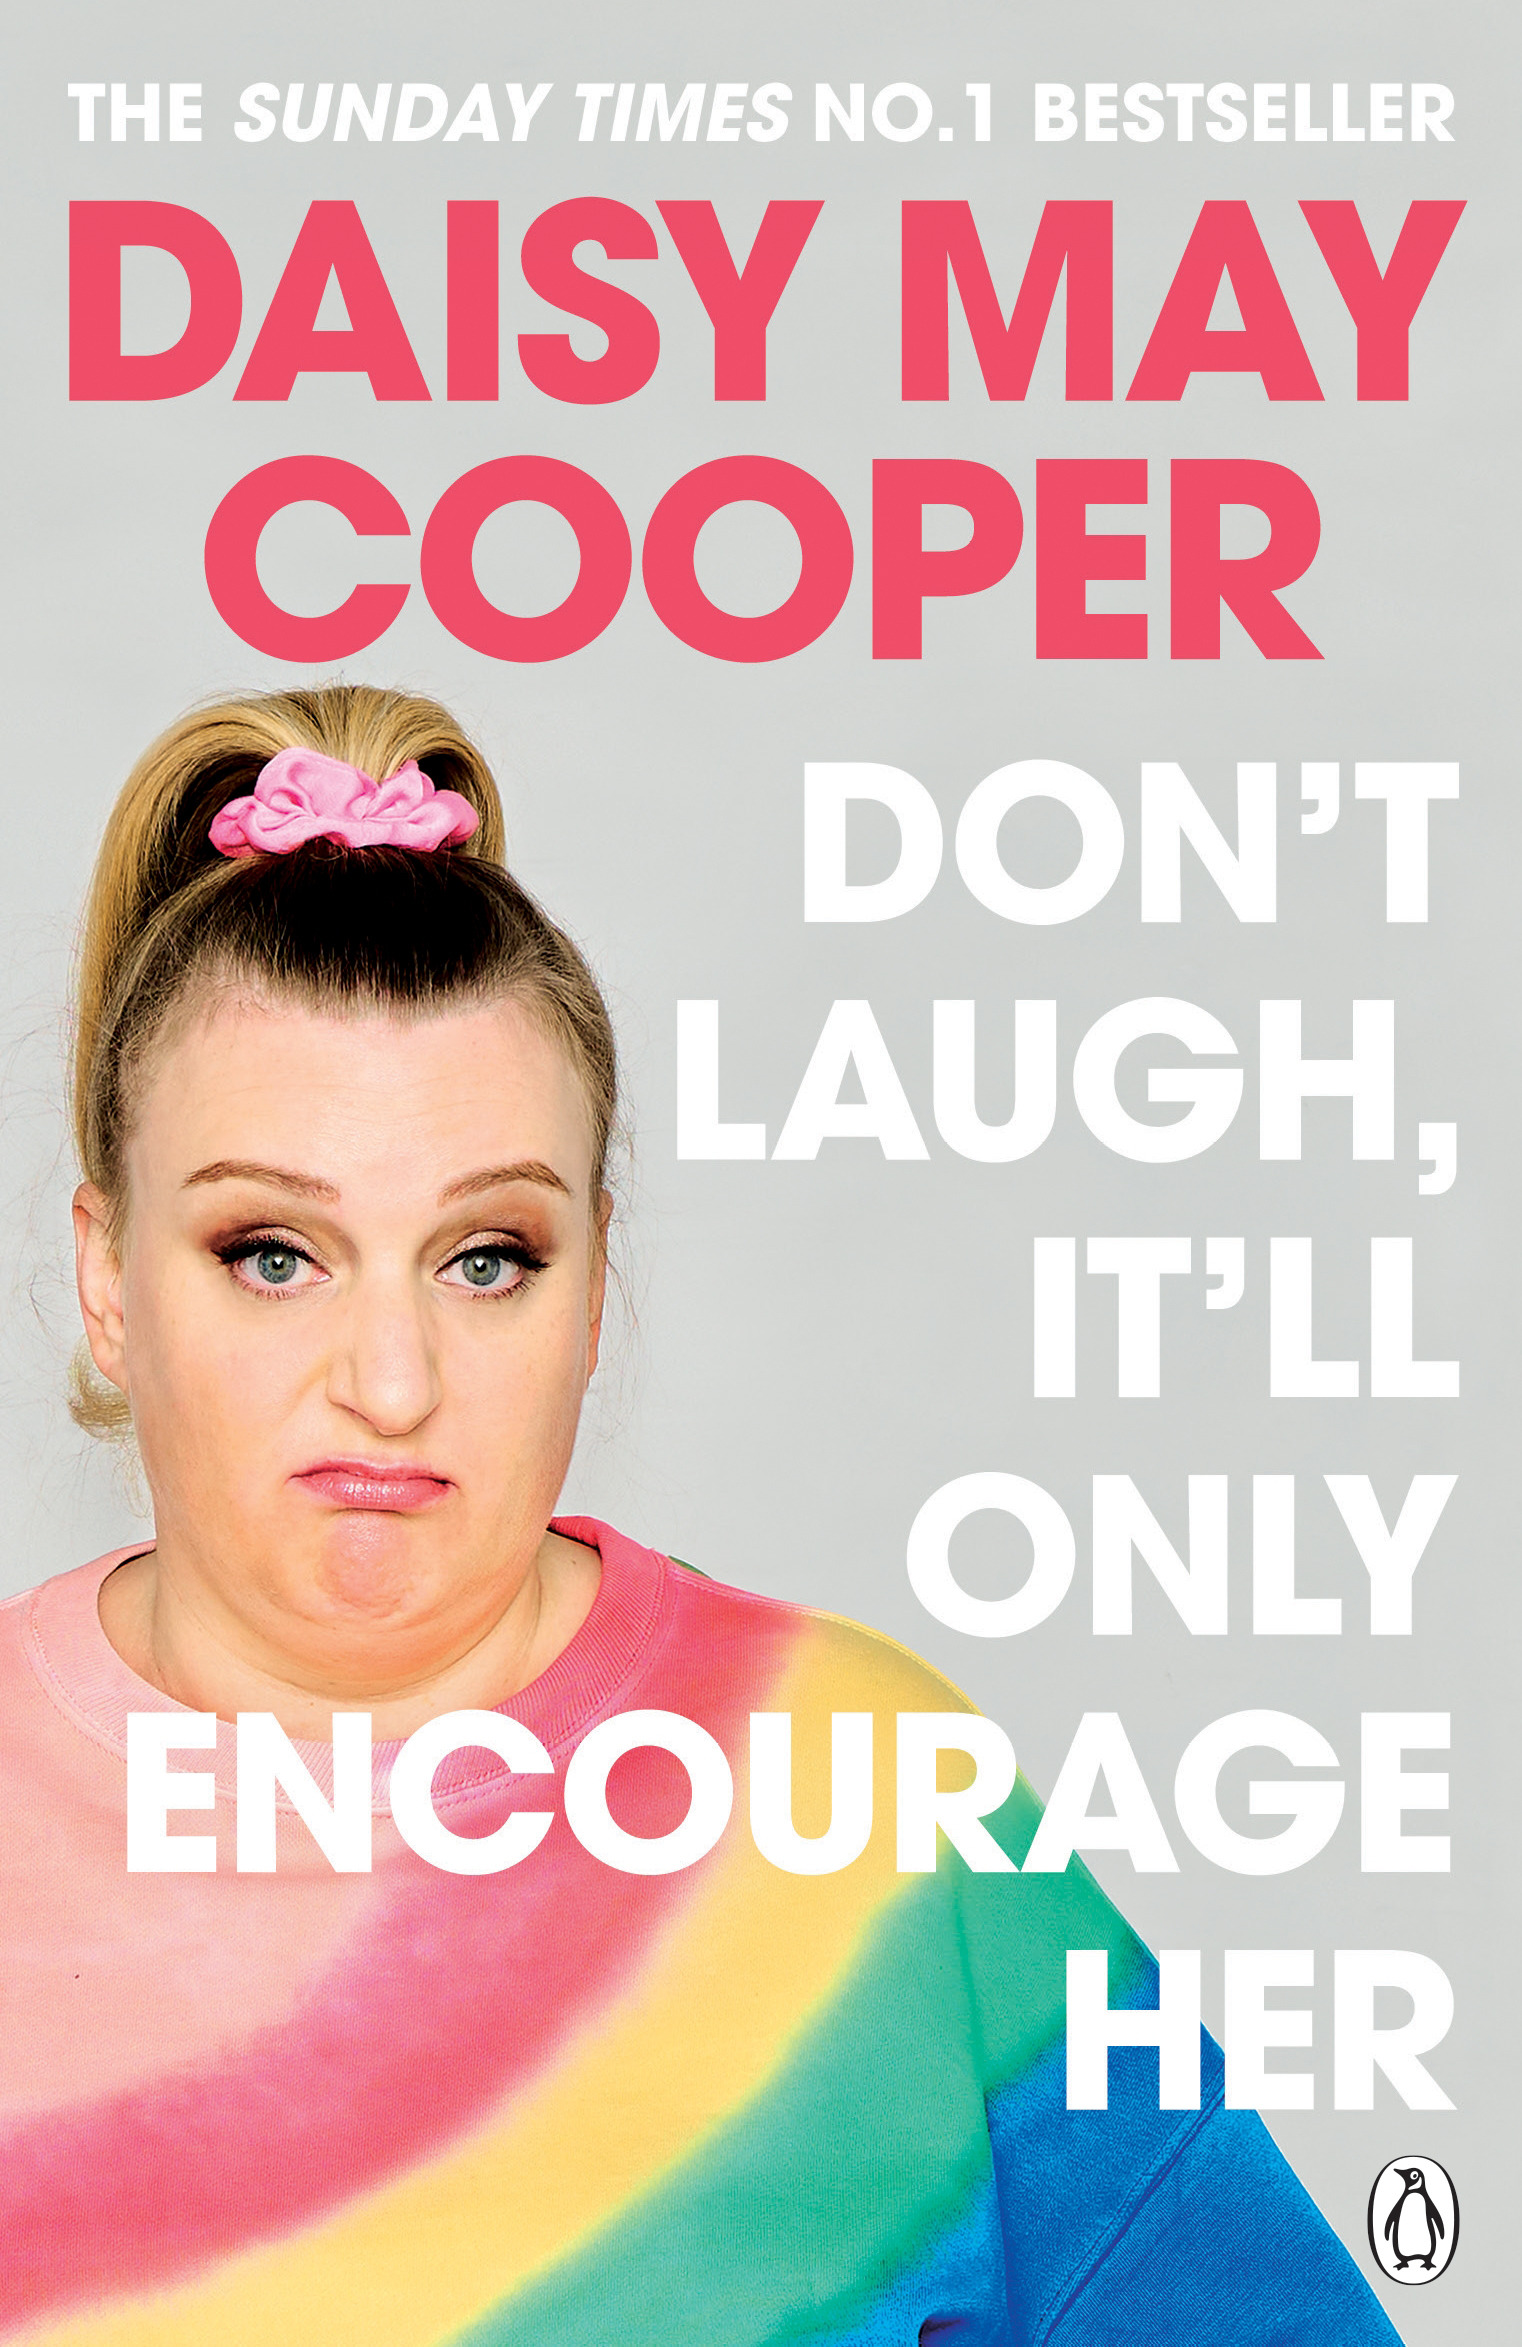 Don't Laugh, It'll Only Encourage Her | Biography & Memoir